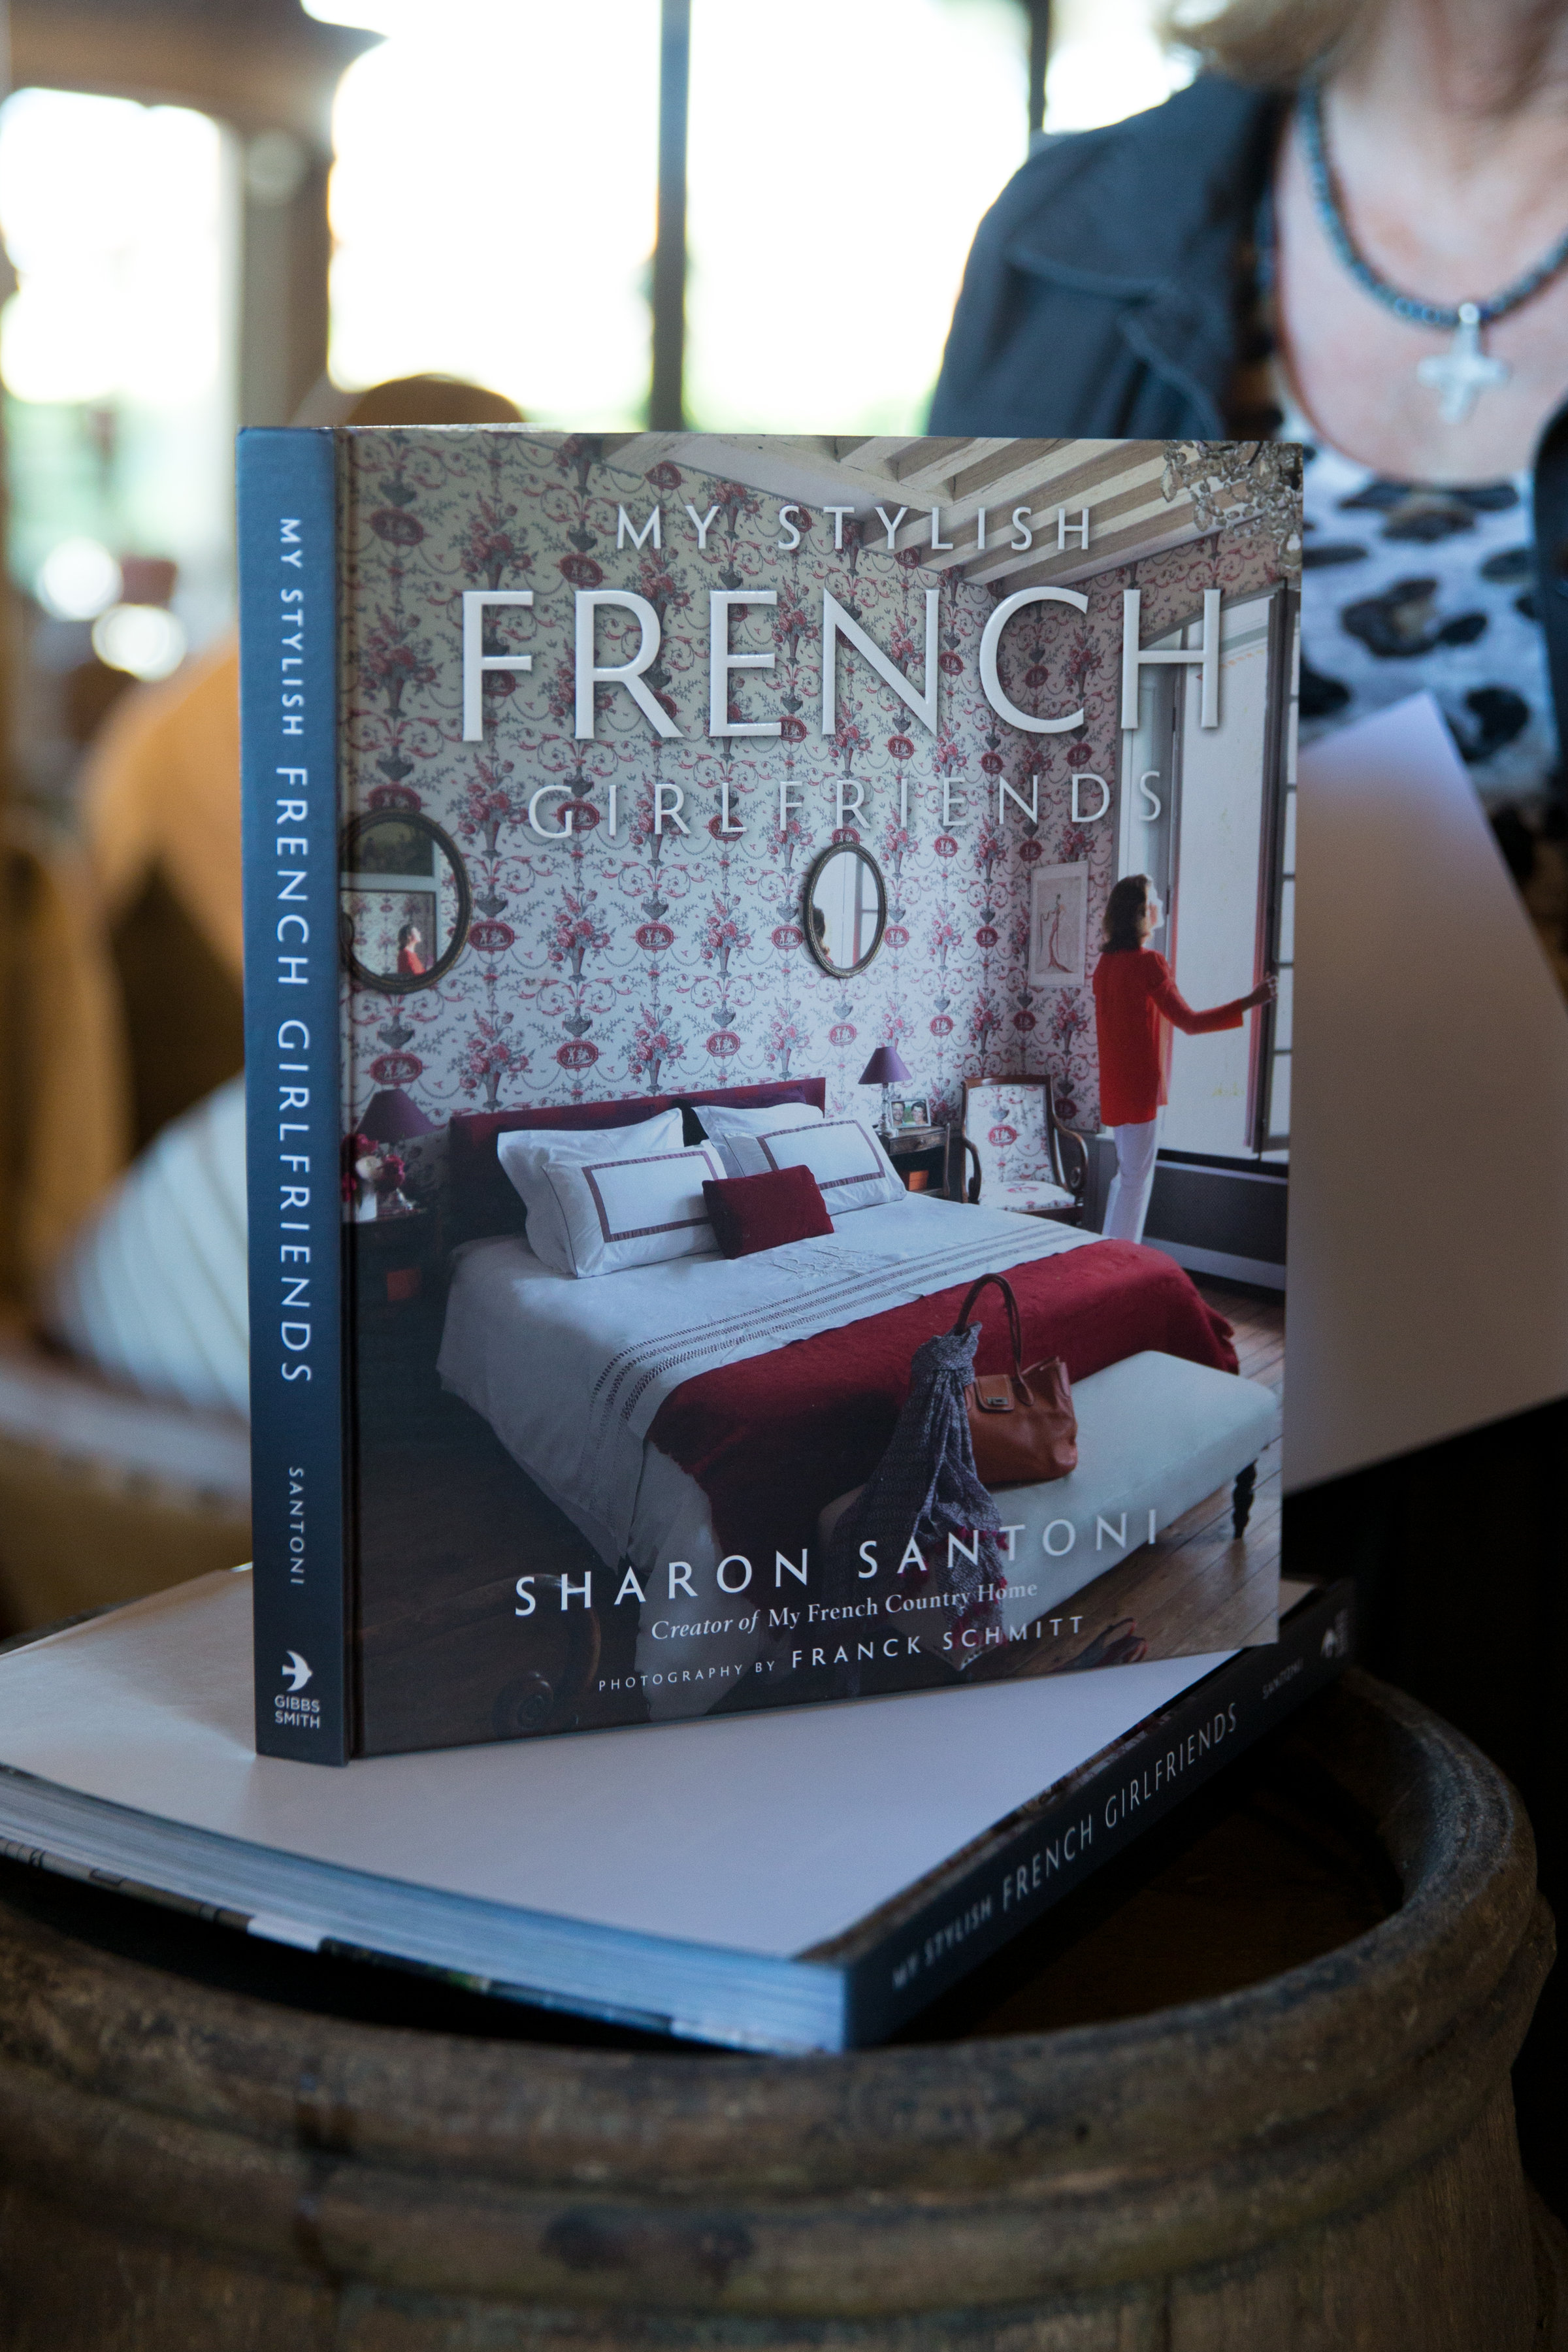 Sharon Santoni's Book Signing at Chateau Sonoma | Portraits to the People {chateausonoma.com}